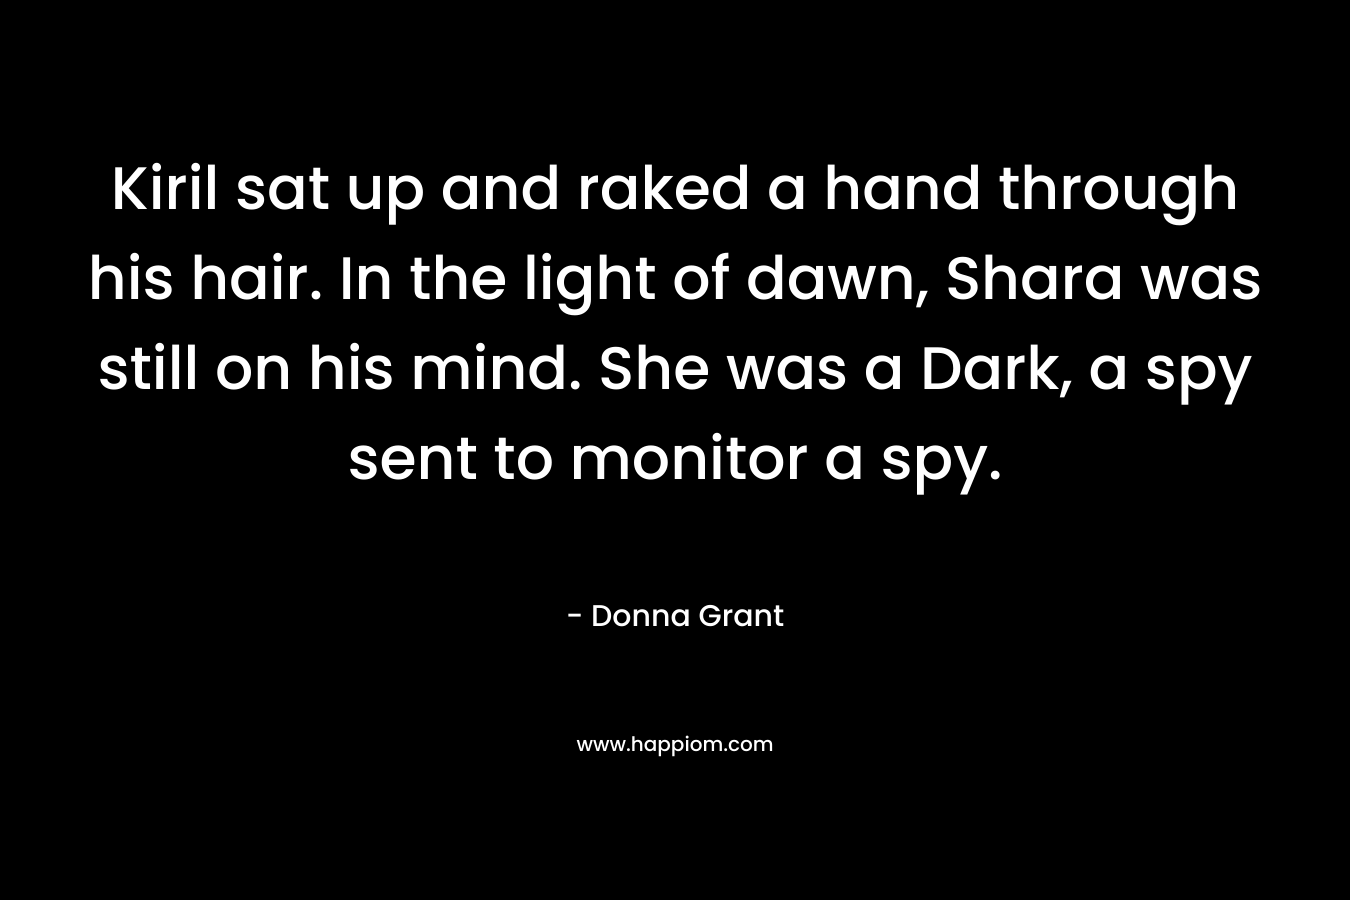 Kiril sat up and raked a hand through his hair. In the light of dawn, Shara was still on his mind. She was a Dark, a spy sent to monitor a spy. – Donna Grant